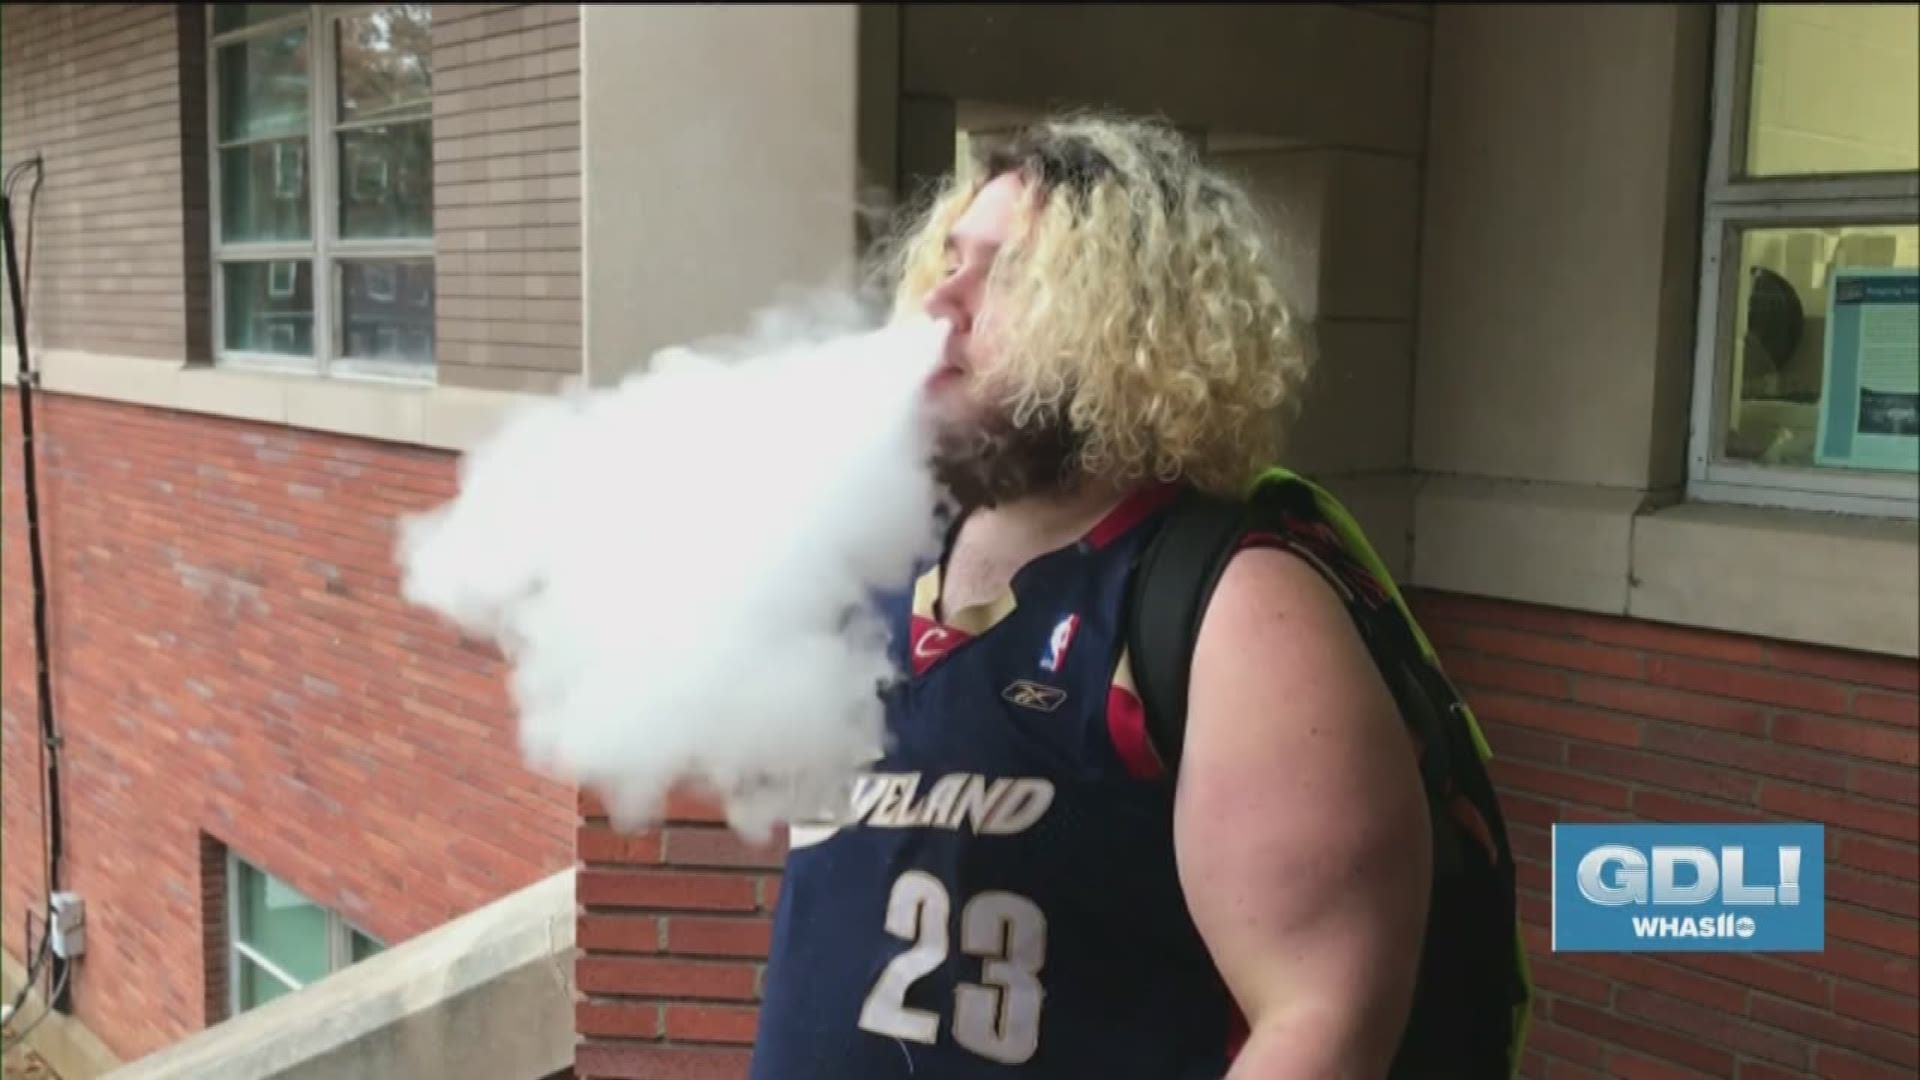 Many of people are no vaping instead of smoking cigarettes, but is it safe? There hasn’t been a lot of research on the health implications of vaping, but that’s changing at the University of Louisville.